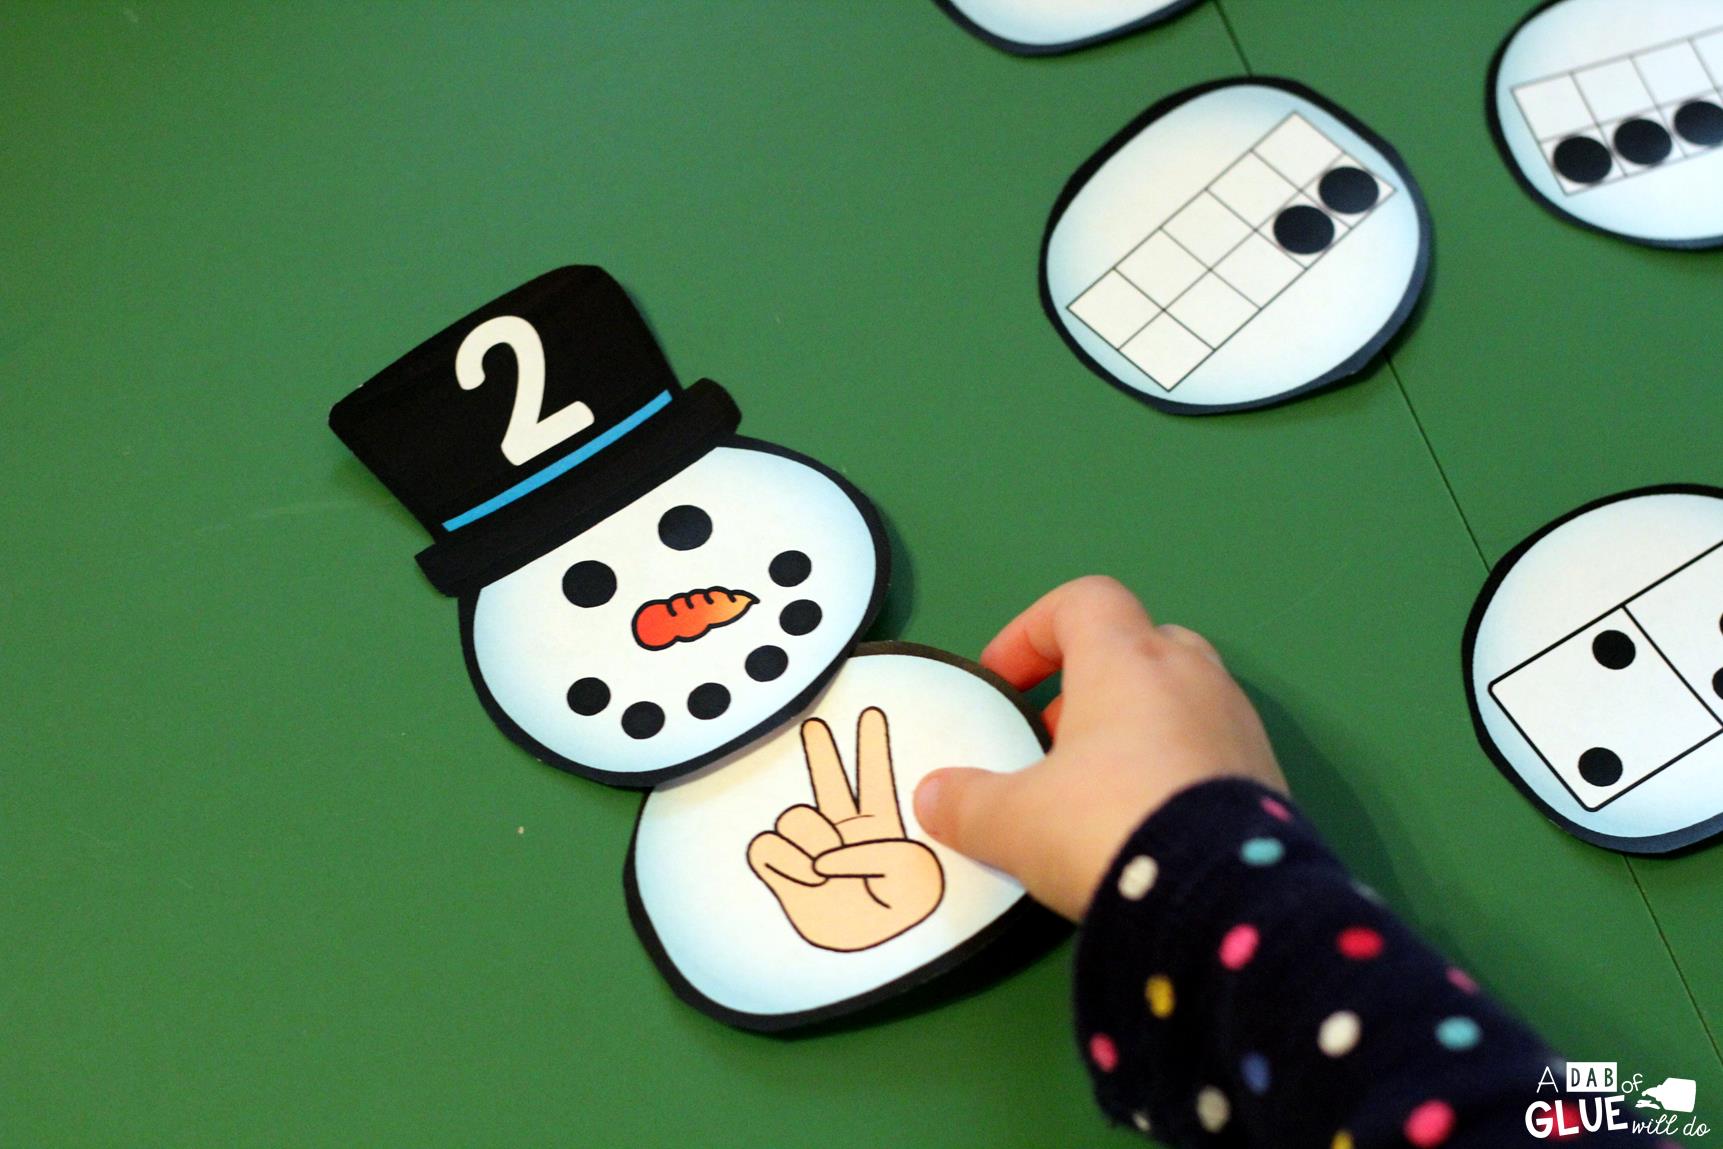 Snowman Number Match Printable is a great addition to your math centers this winter season. This free printable is perfect for preschool, kindergarten, and first grade students.  